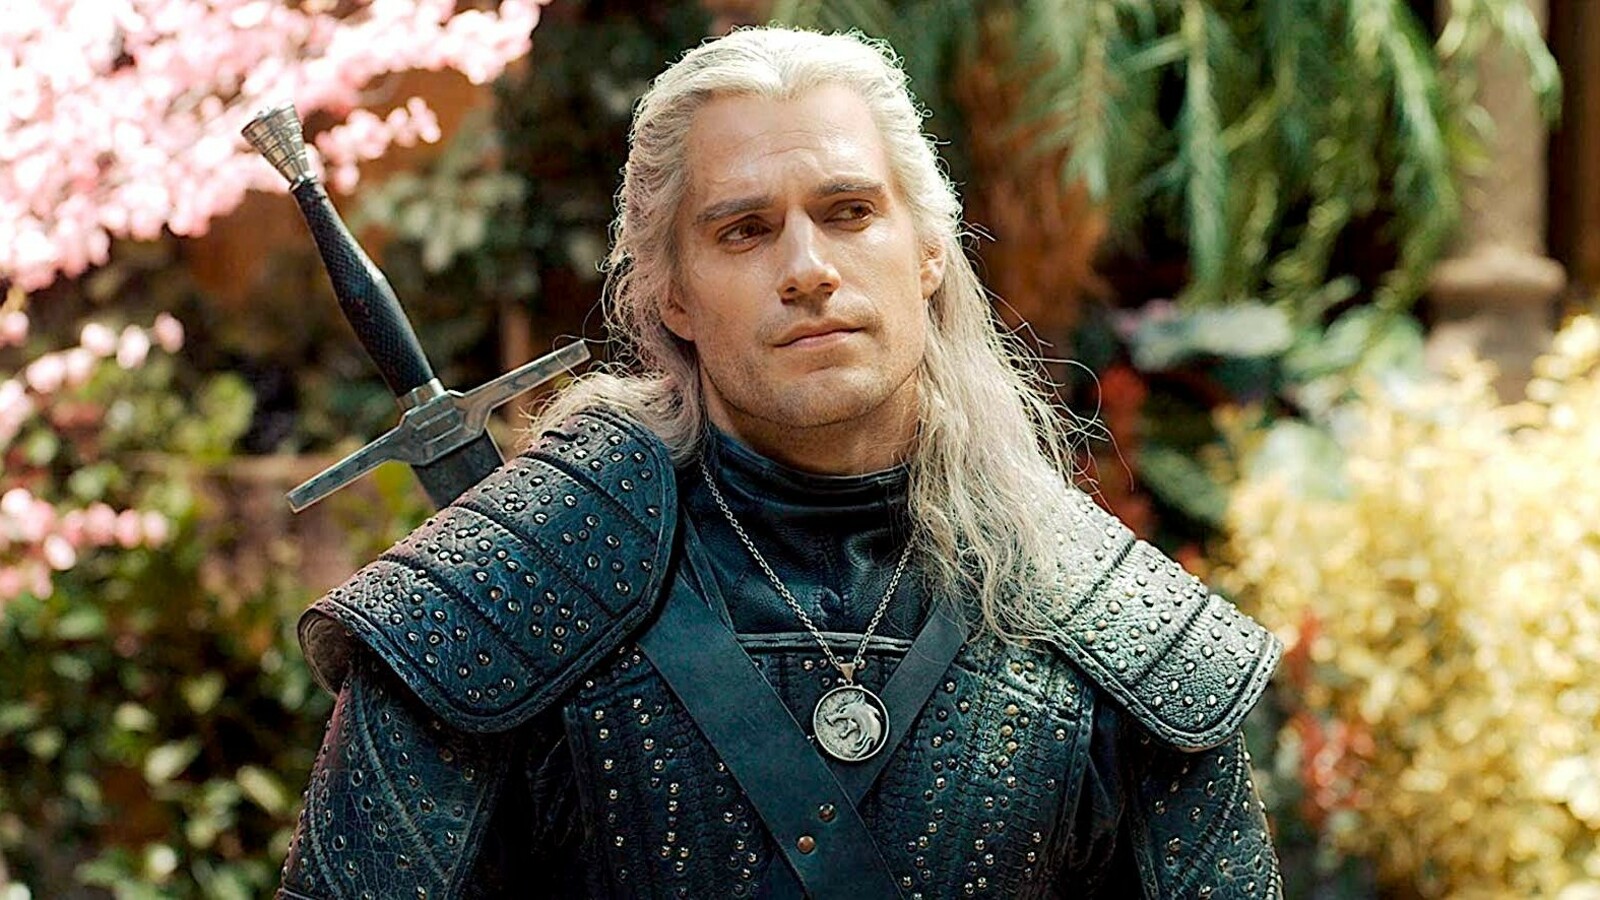 “The Witcher” Season 3 will feature Henry Cavill’s “Heroic Sendoff”